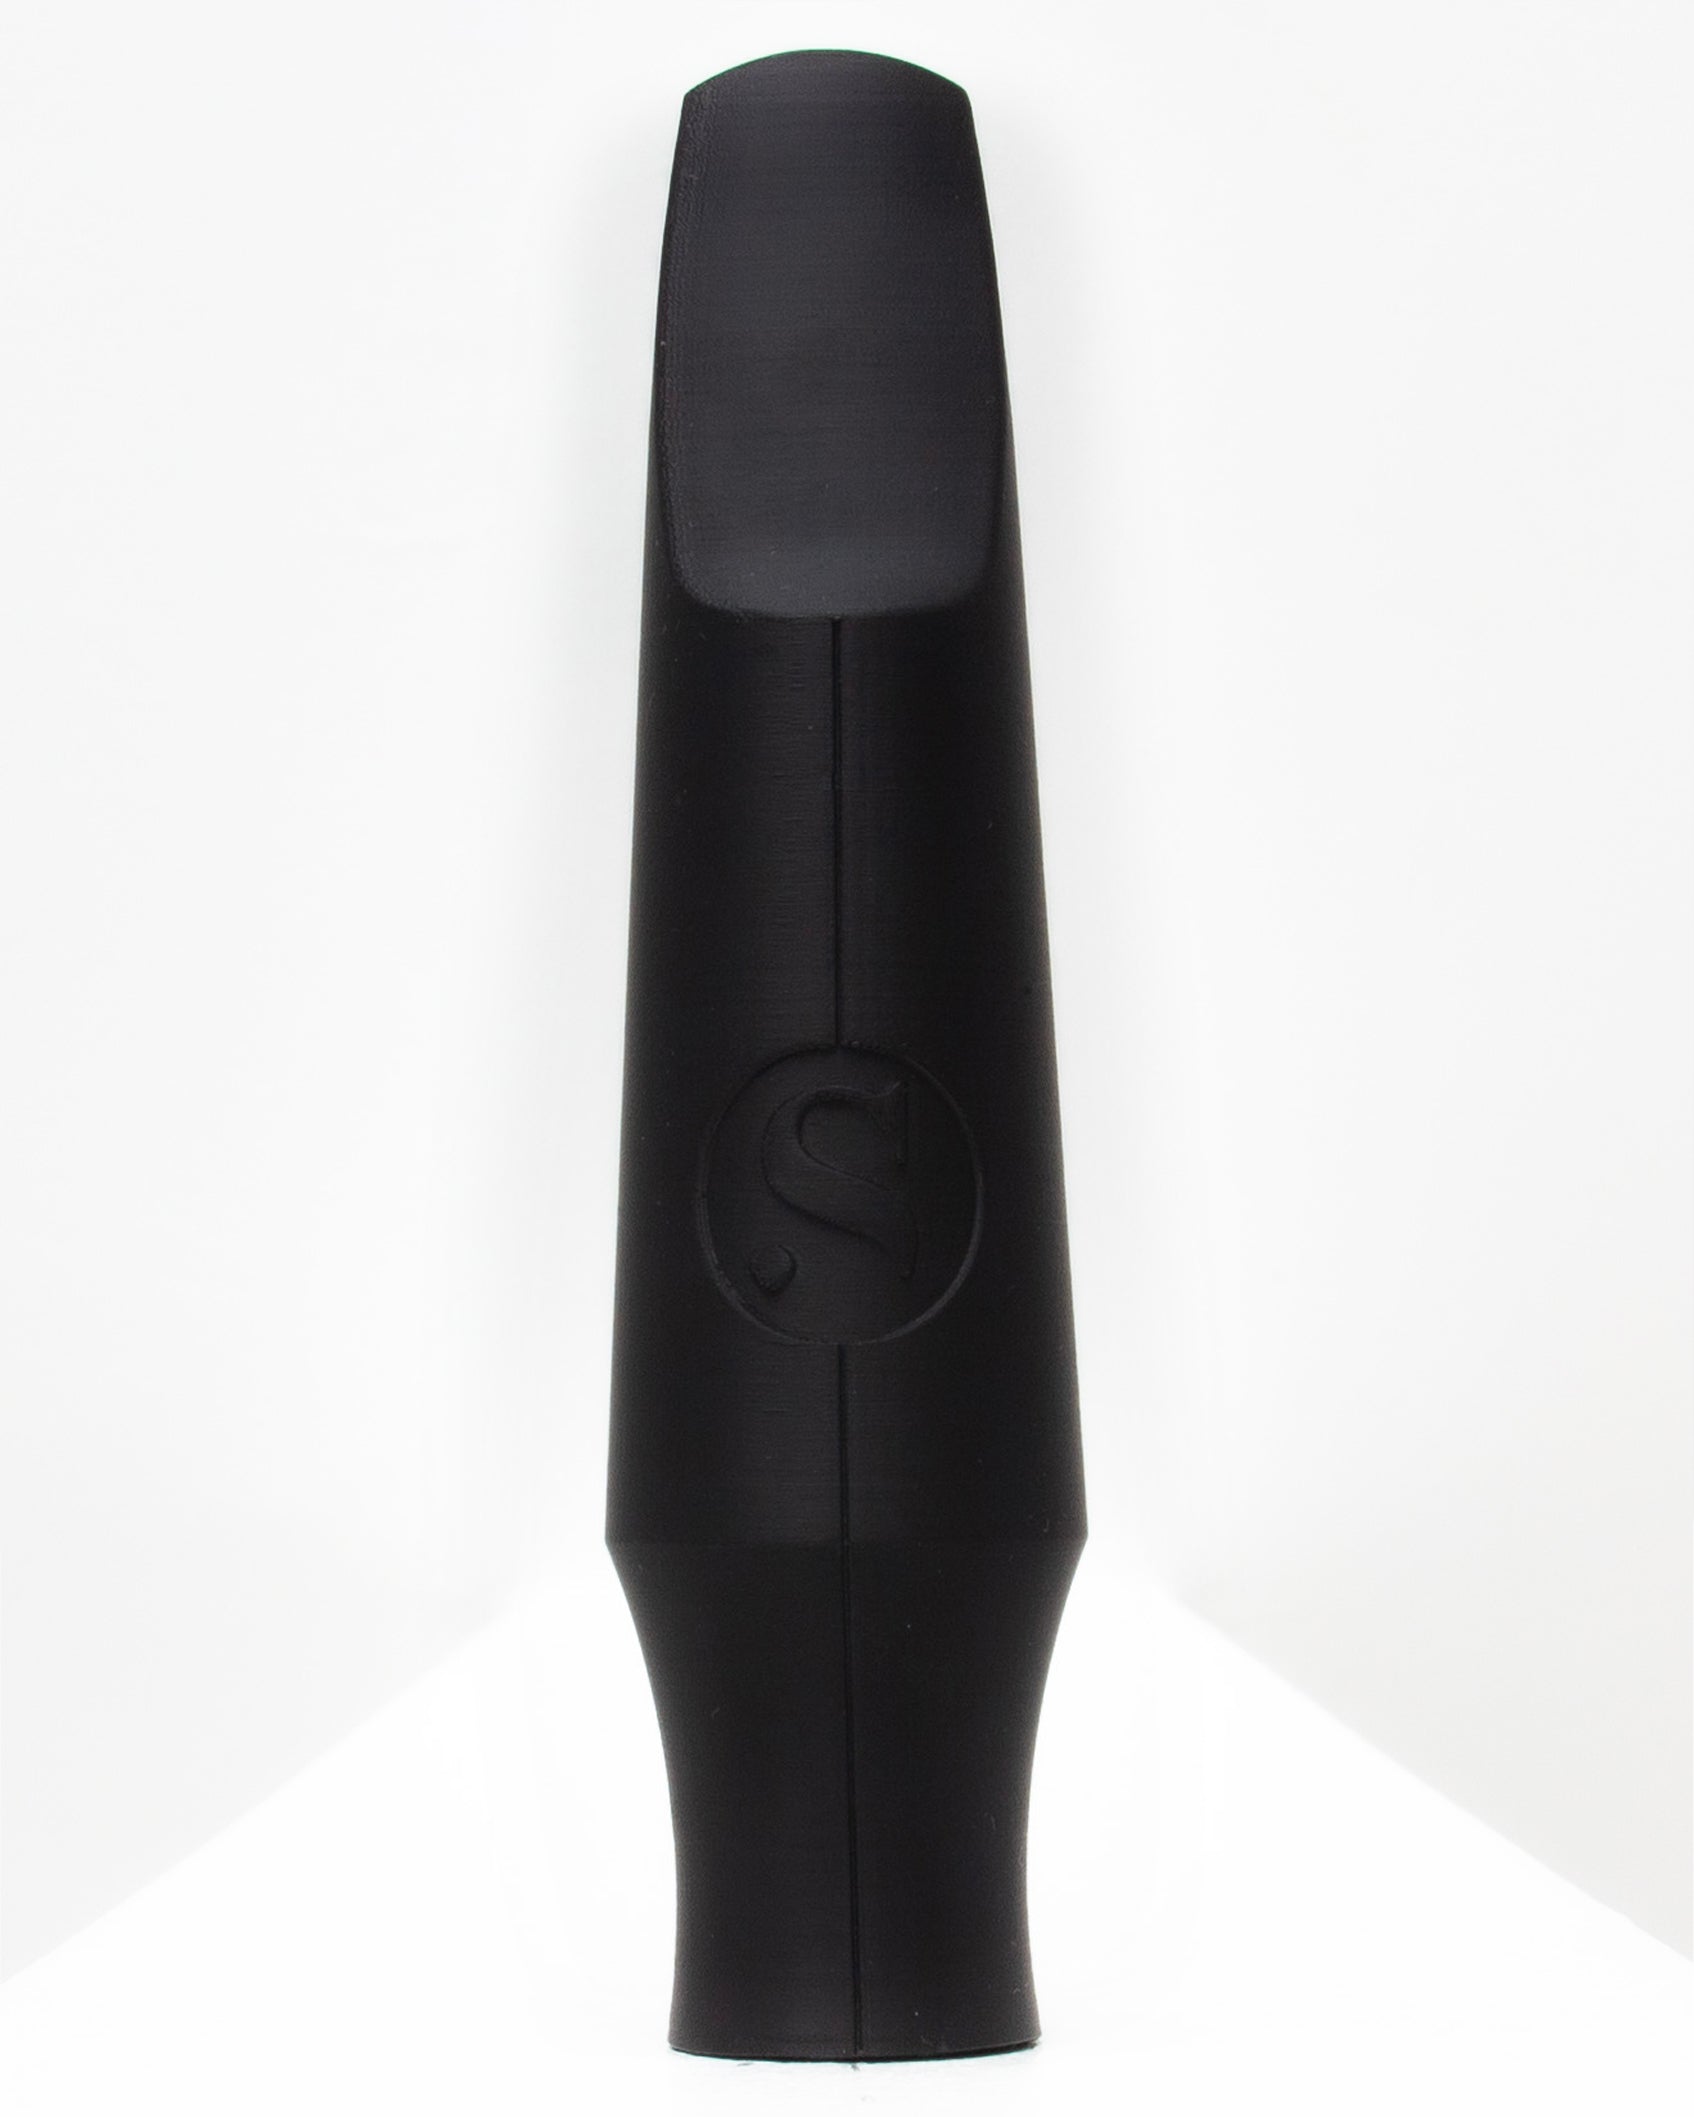 Baritone Signature Saxophone mouthpiece - Adrian Condis by Syos - 9 / Pitch Black